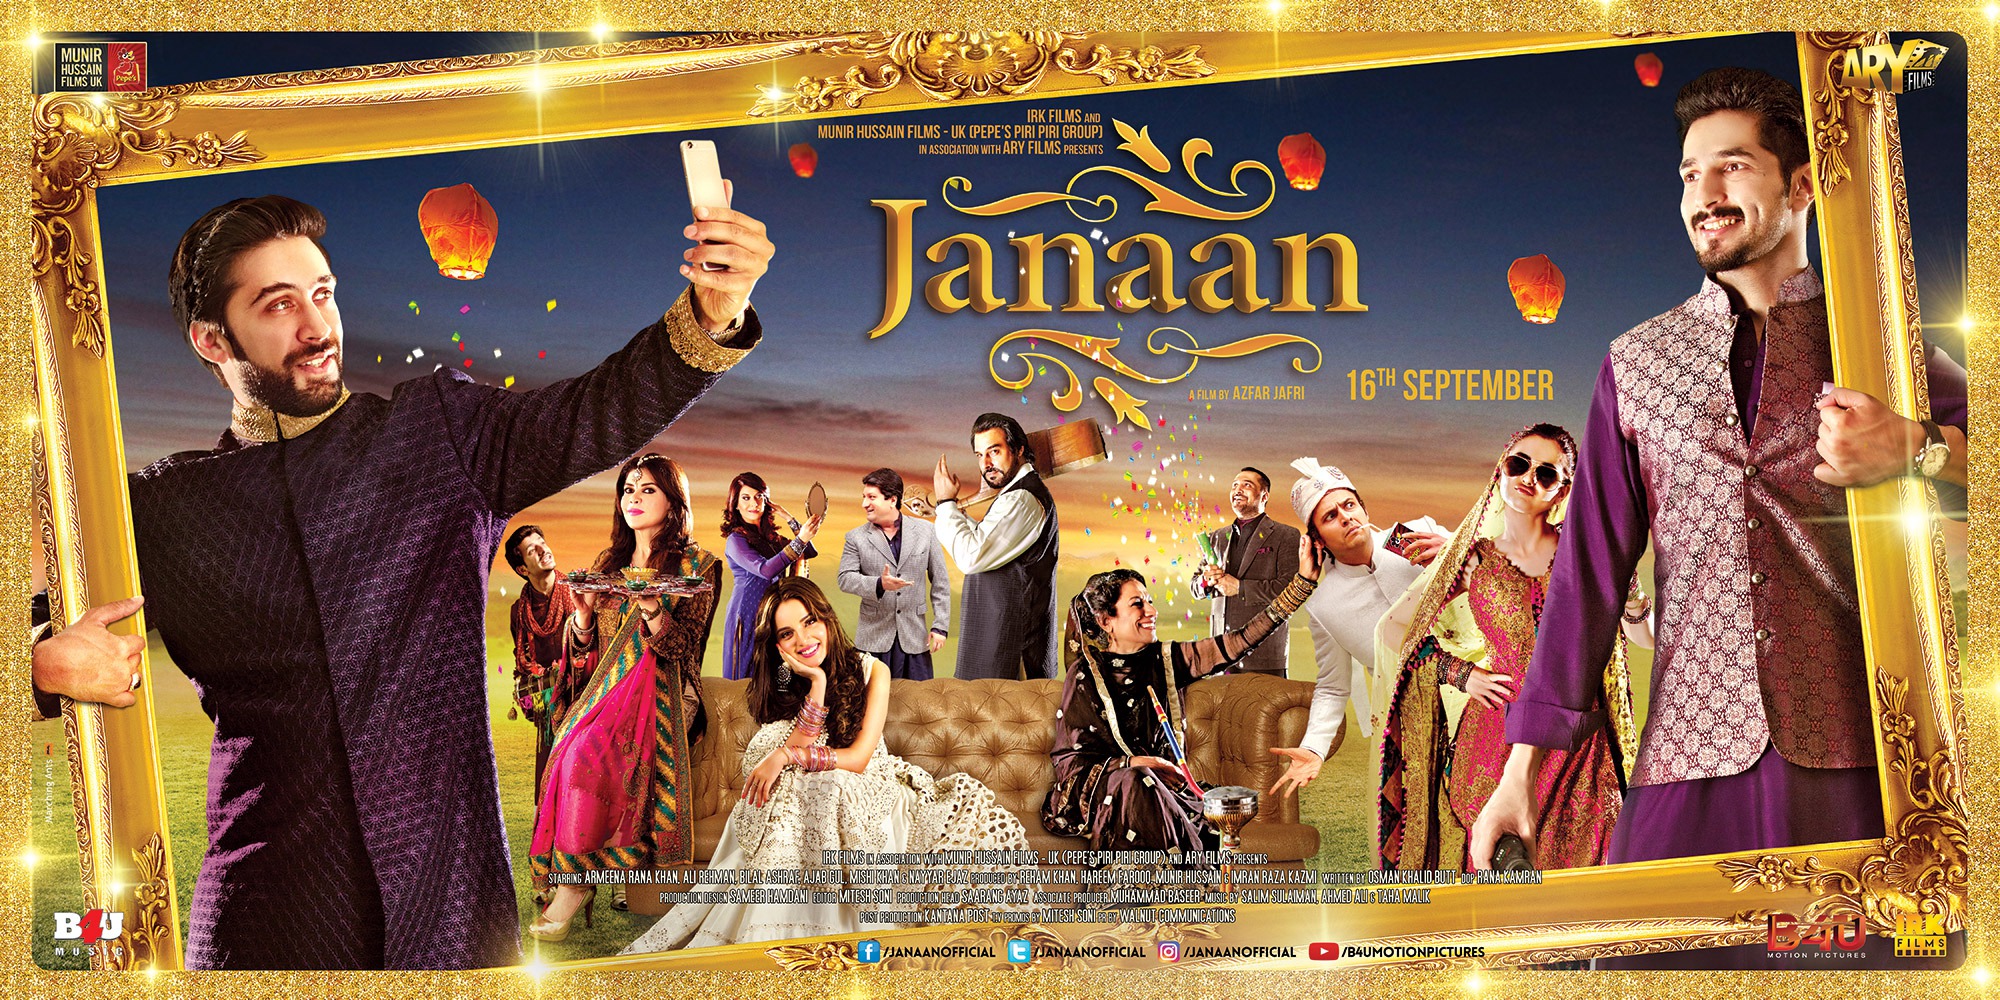 Mega Sized Movie Poster Image for Janaan (#3 of 3)